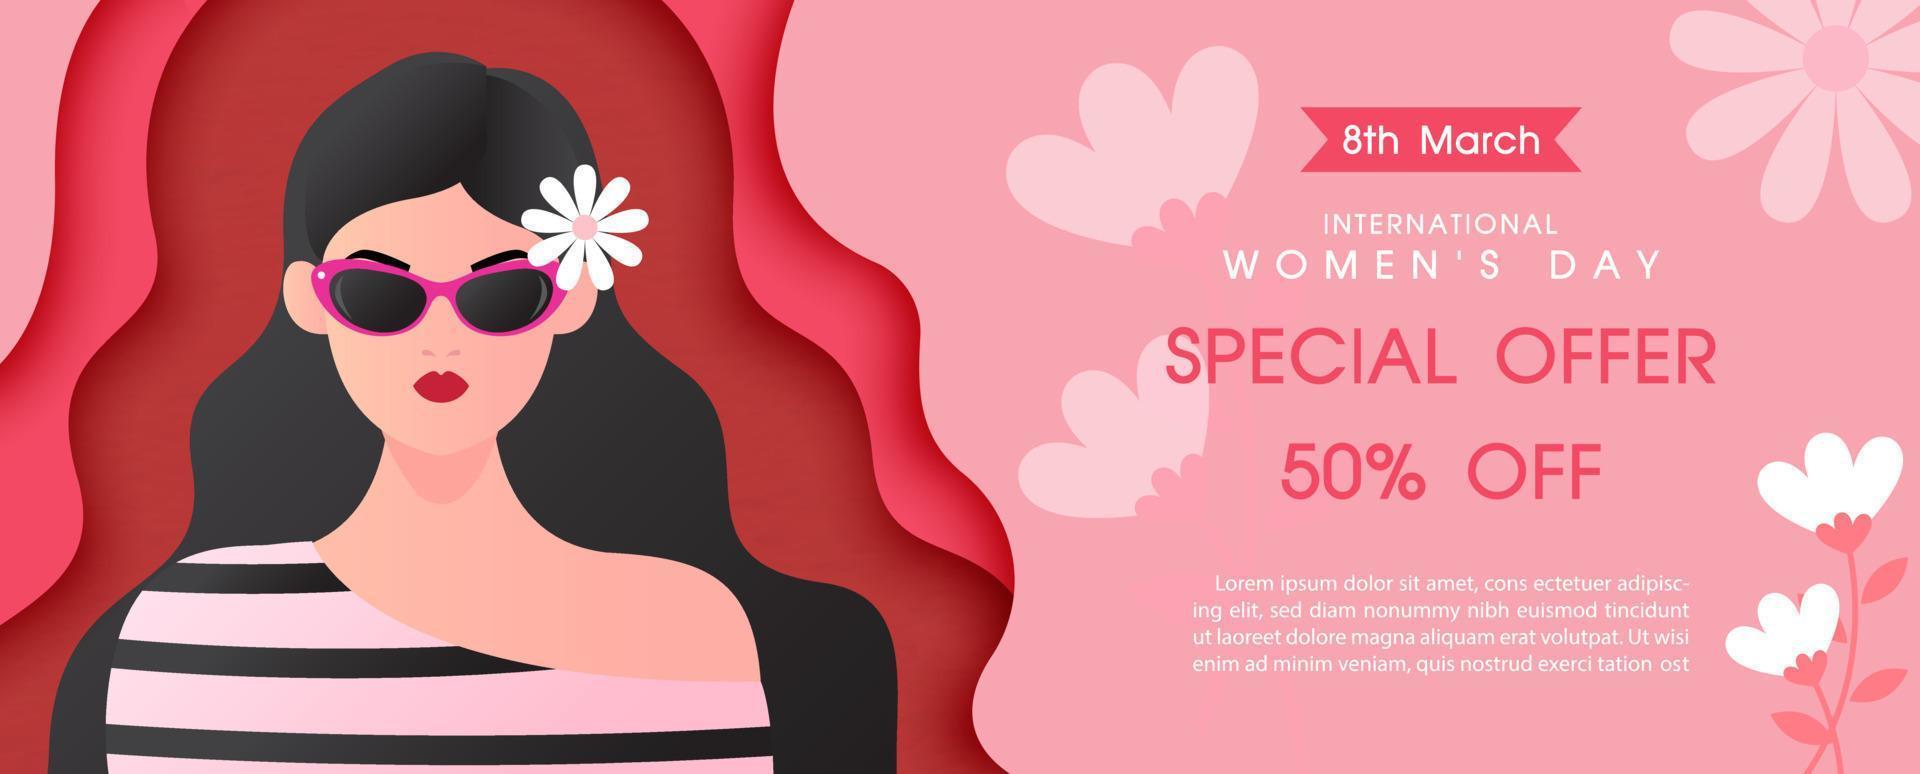 Modern and beauty woman with women's day specials offer sale wording on flower pattern and pink background. Card and poster's campaign of Women's day in paper cut style vector